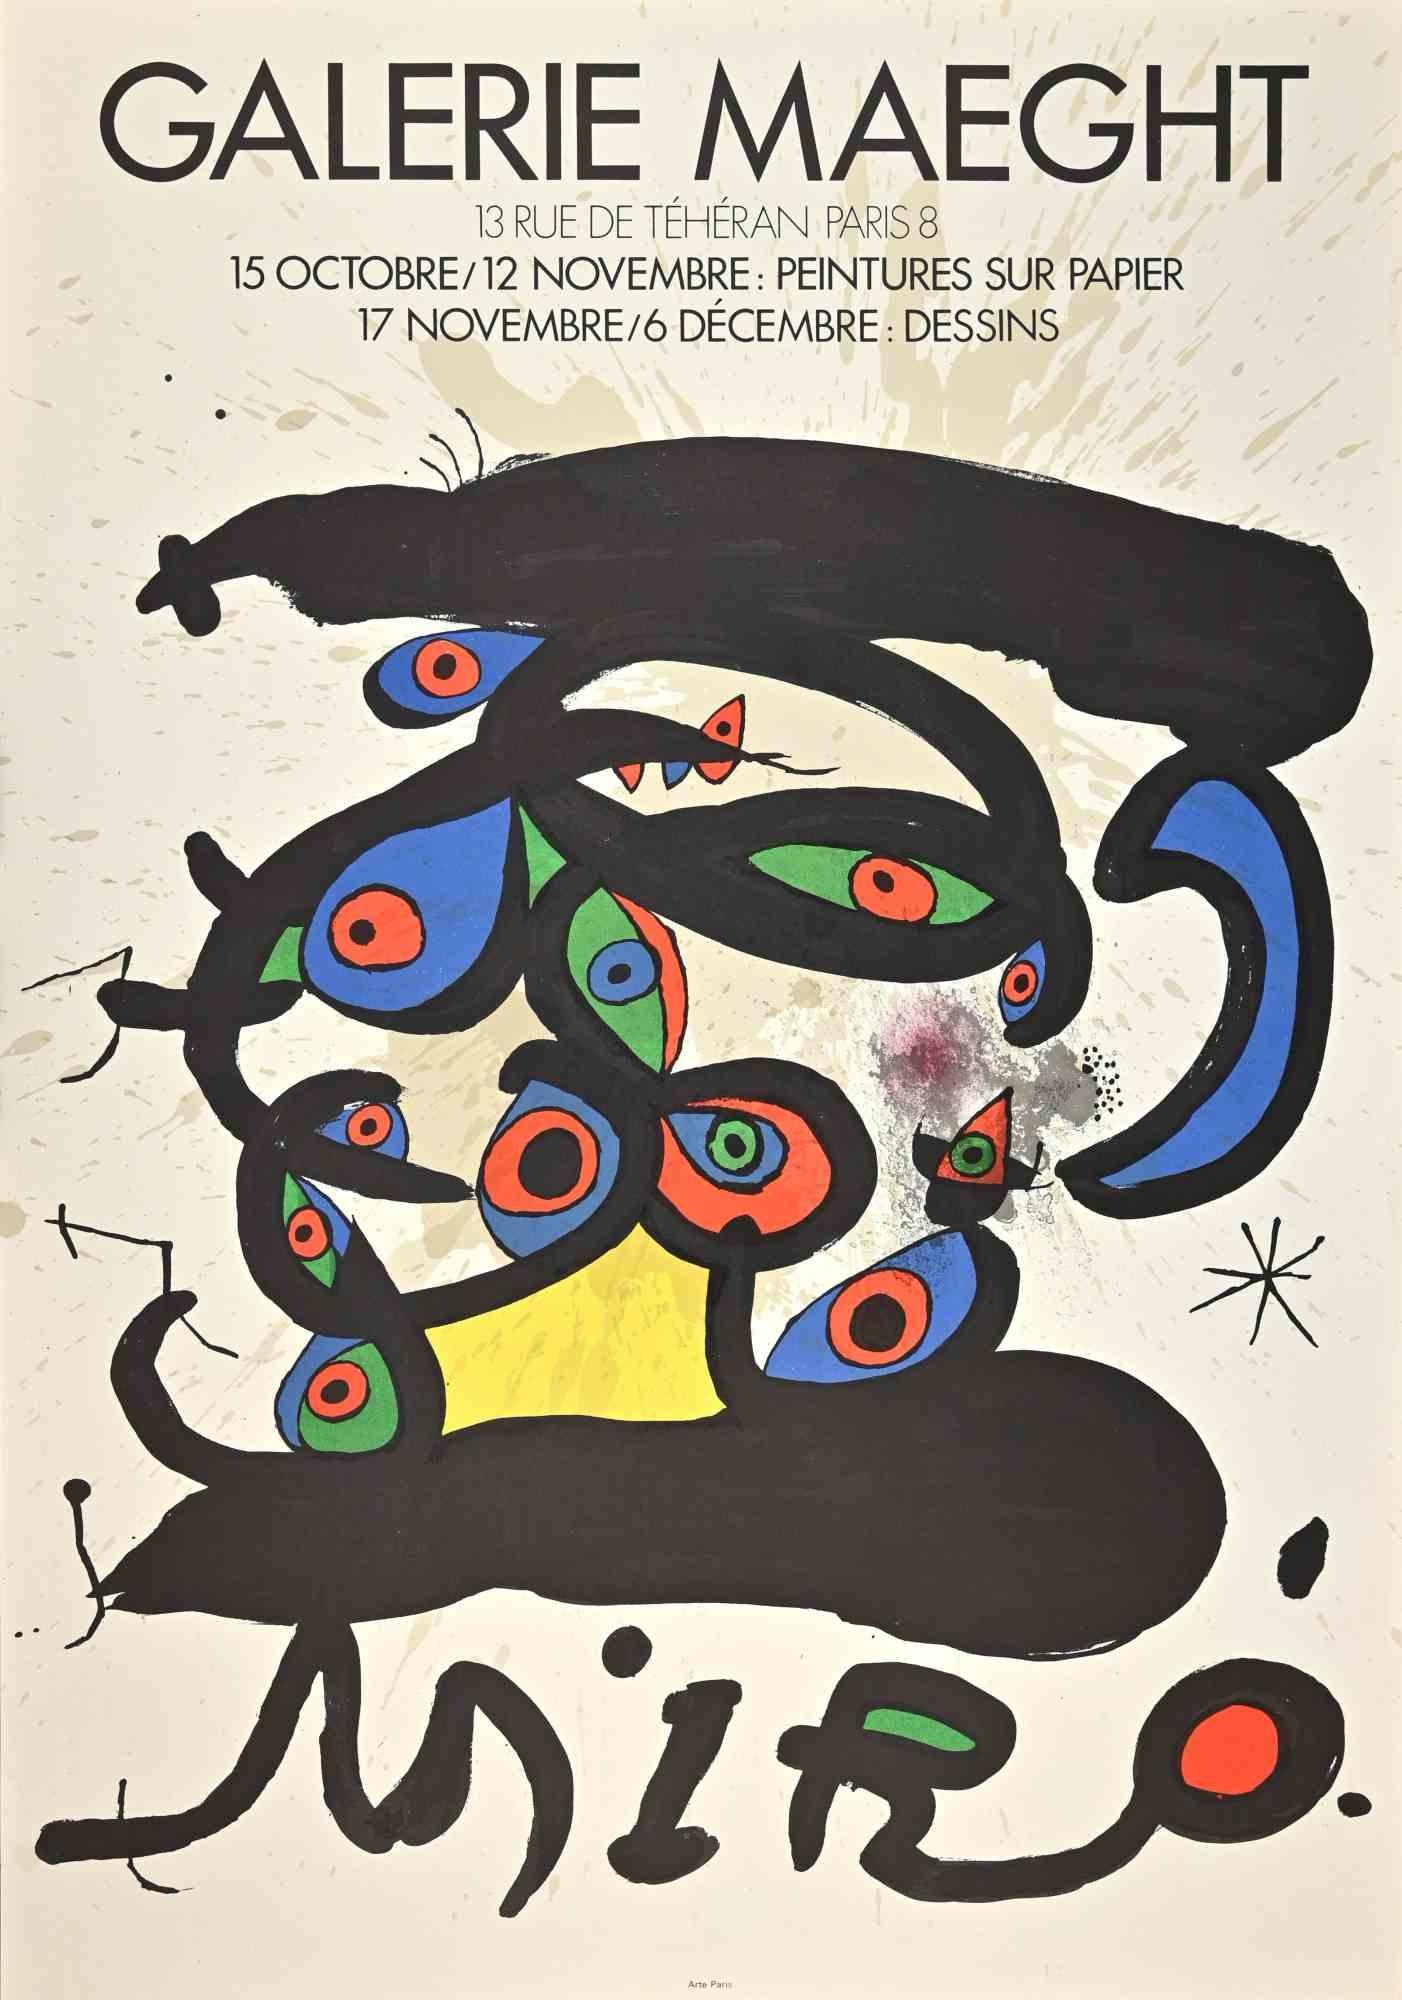 Abstract Print (after) Joan Miró - The Vintage Poster Exposition Galerie Maeght-Lithographie/Offset d'après J. Mirò-1970s